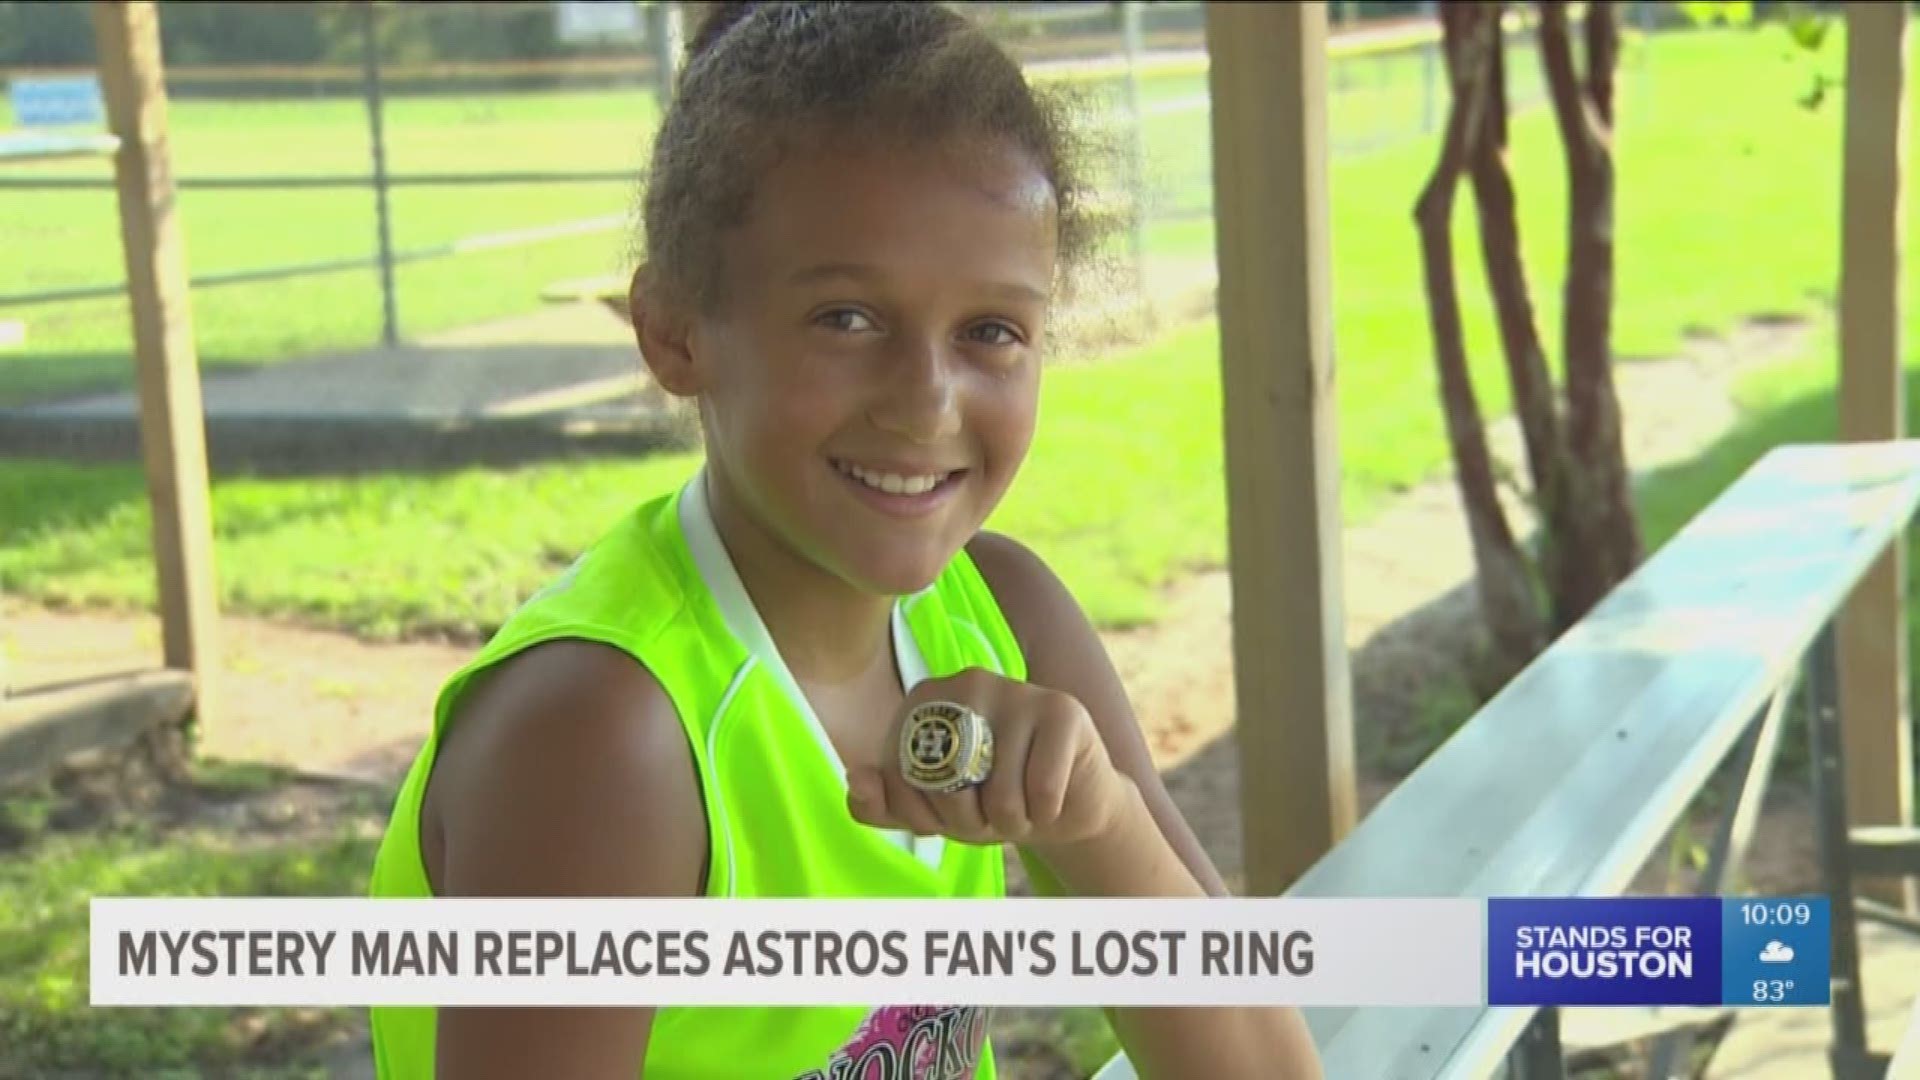 A mom says her daughter accidentally lost her Astros giveaway ring at the game last night, but a kind man behind her gave her his.